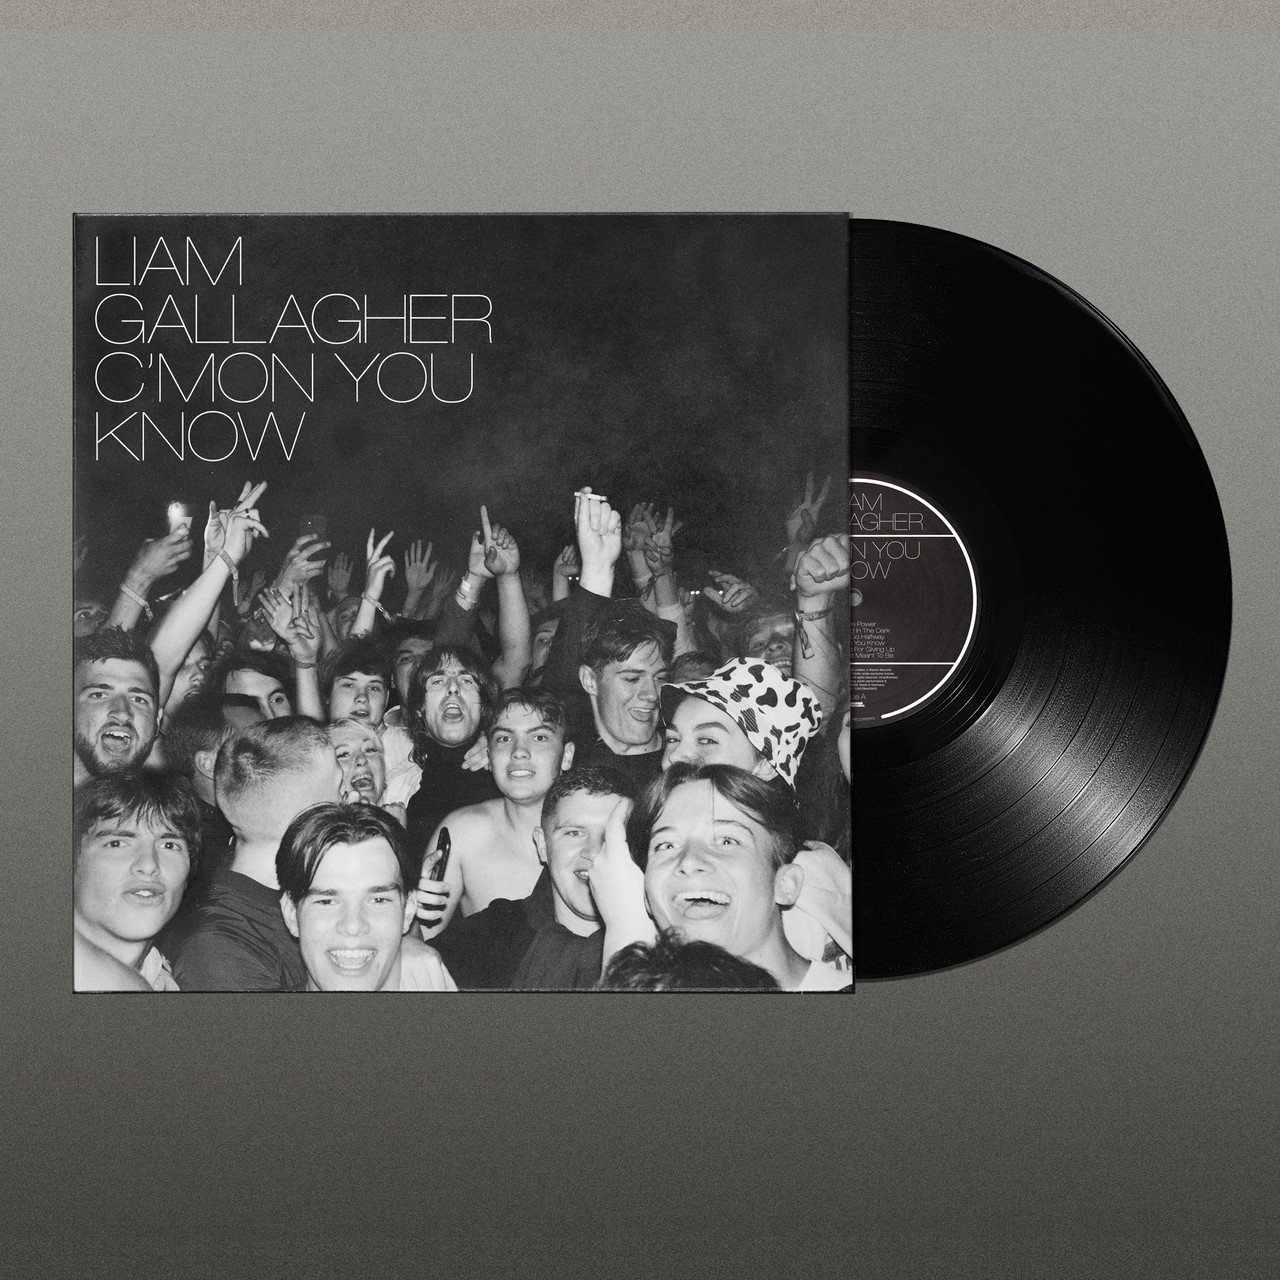 Liam Gallagher - C'Mon You Know